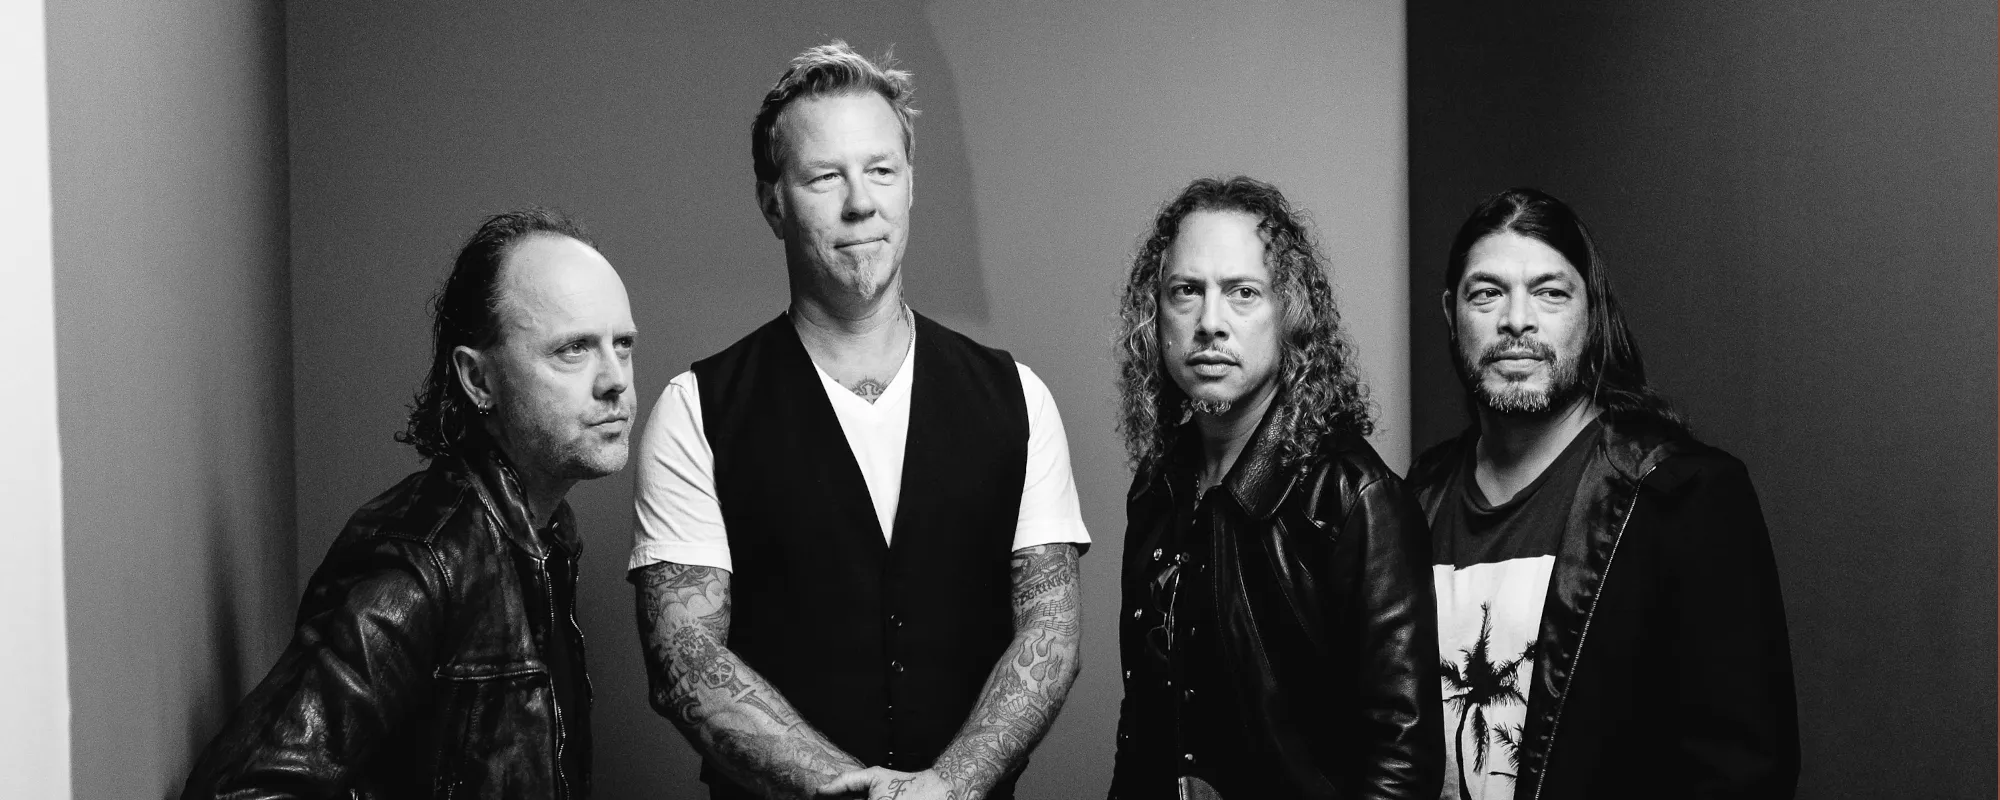 Jack White Congratulates Metallica for Buying a Vinyl Press—It’s “Outstanding”